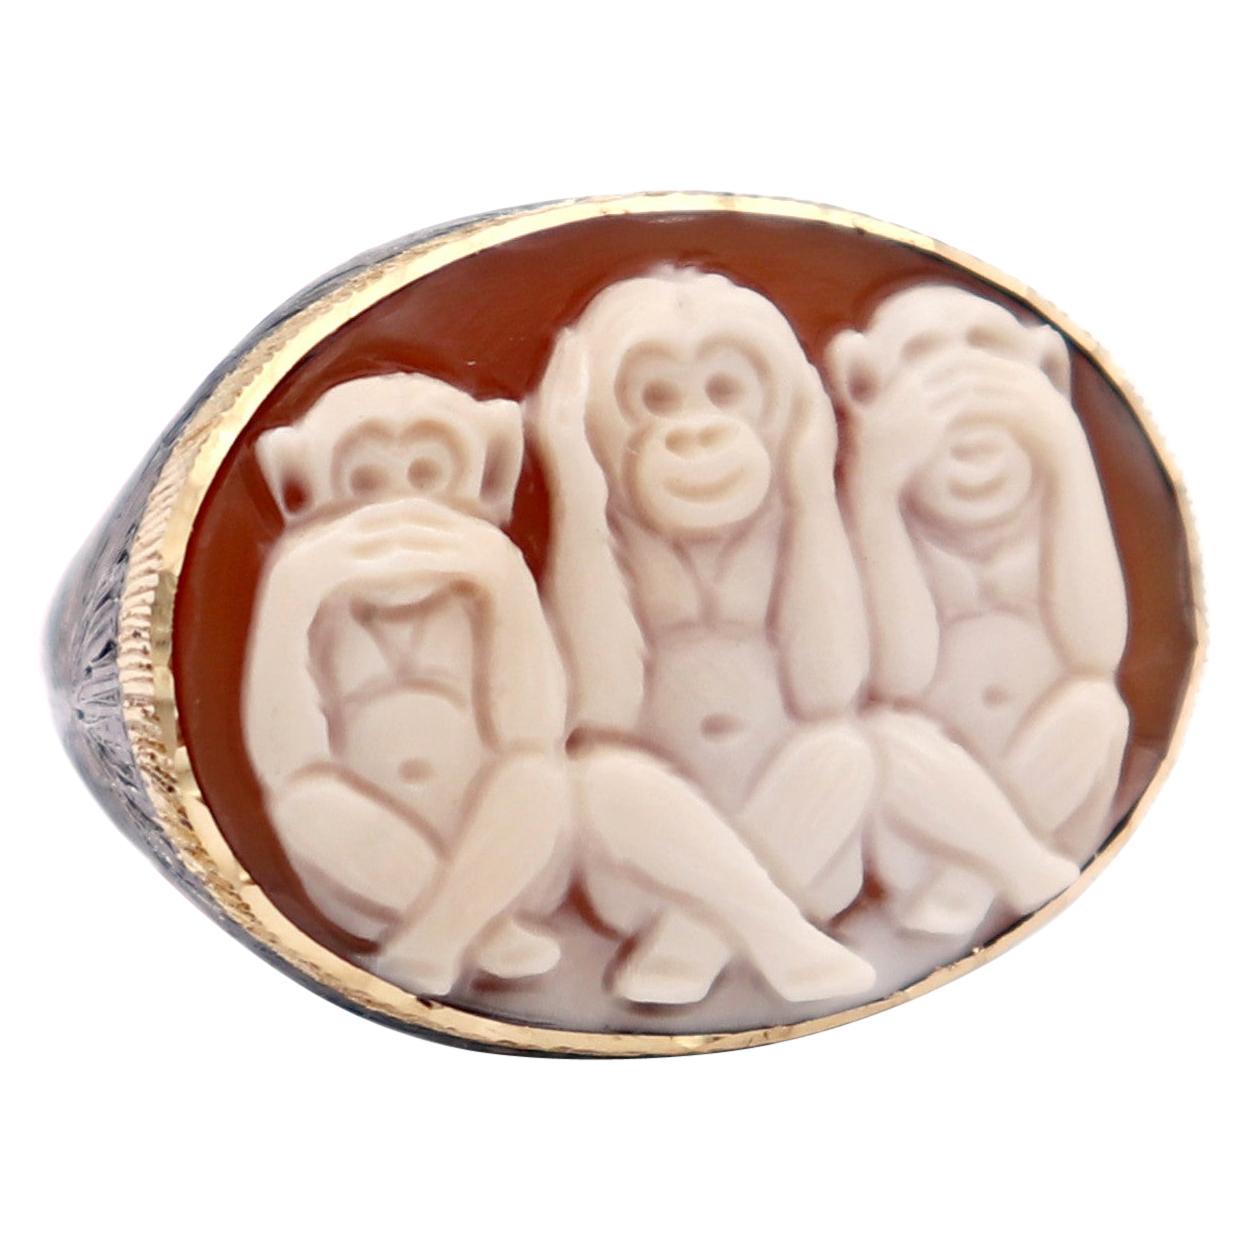 Amedeo "Wise Monkeys" Cameo Ring with 18 Karat Gold